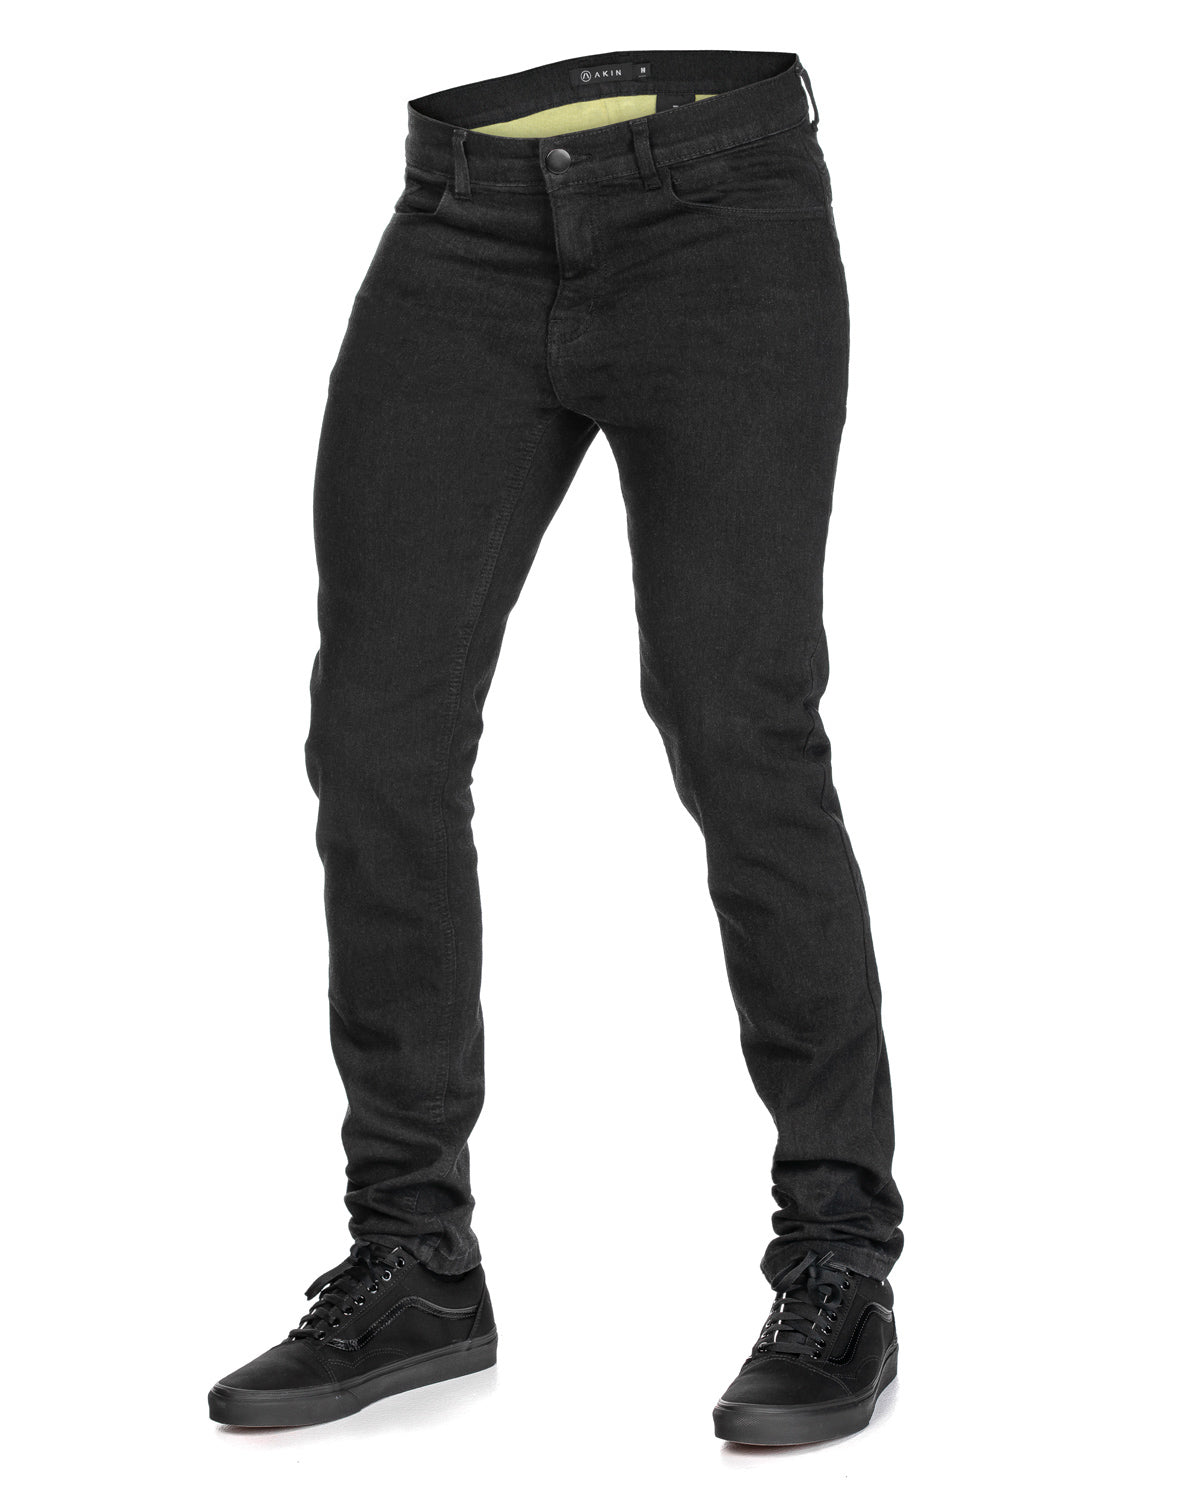 Buy Kevlar Jeans With Express Delivery - Kevlar Motorcycle Jeans